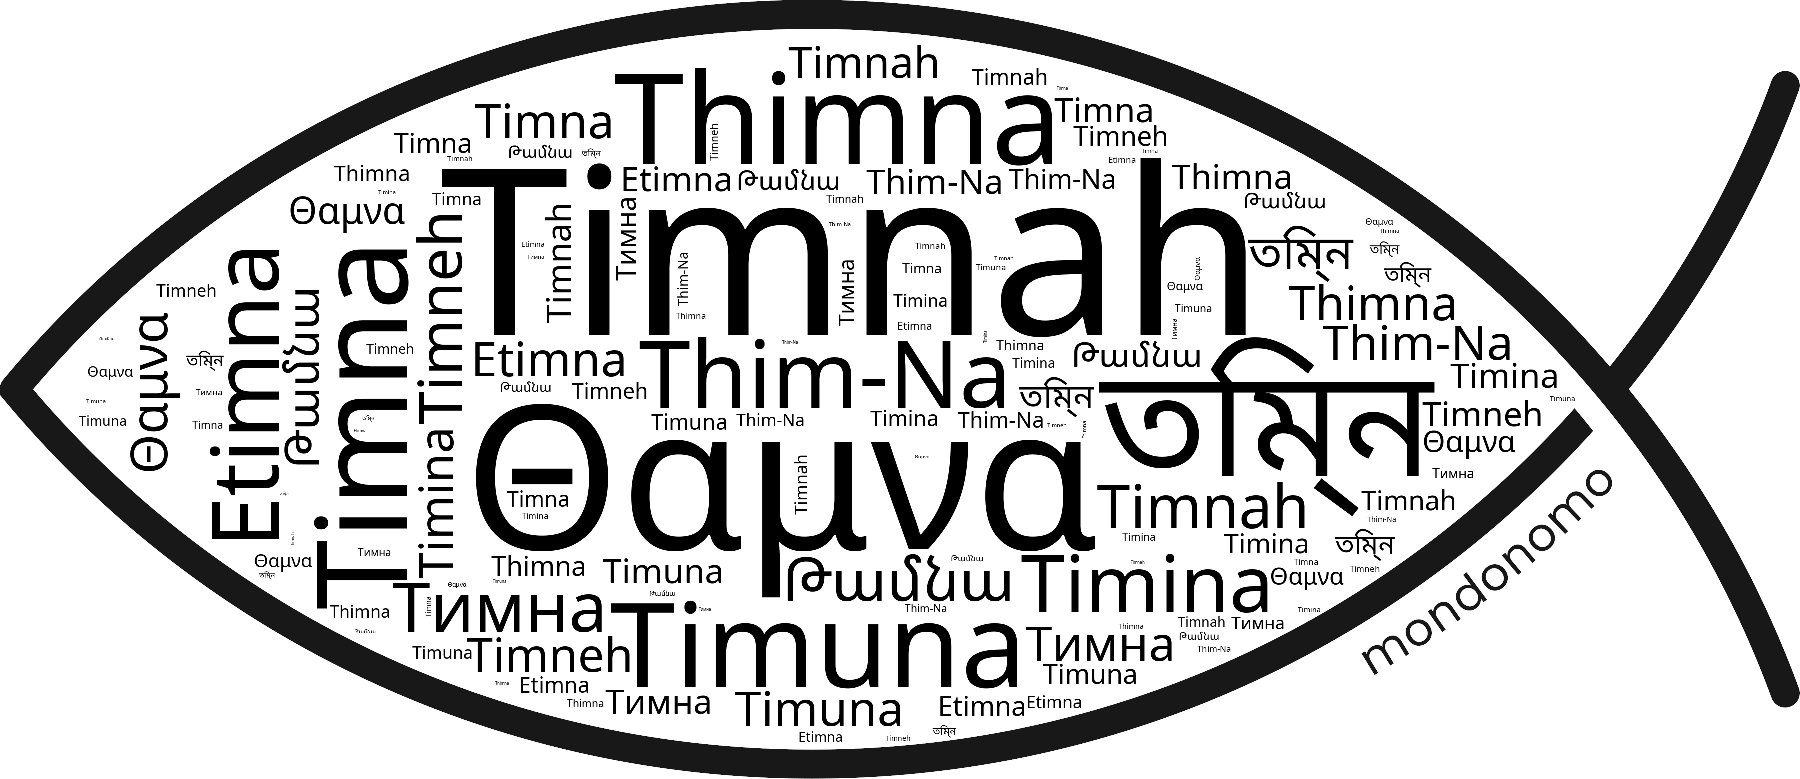 Name Timnah in the world's Bibles